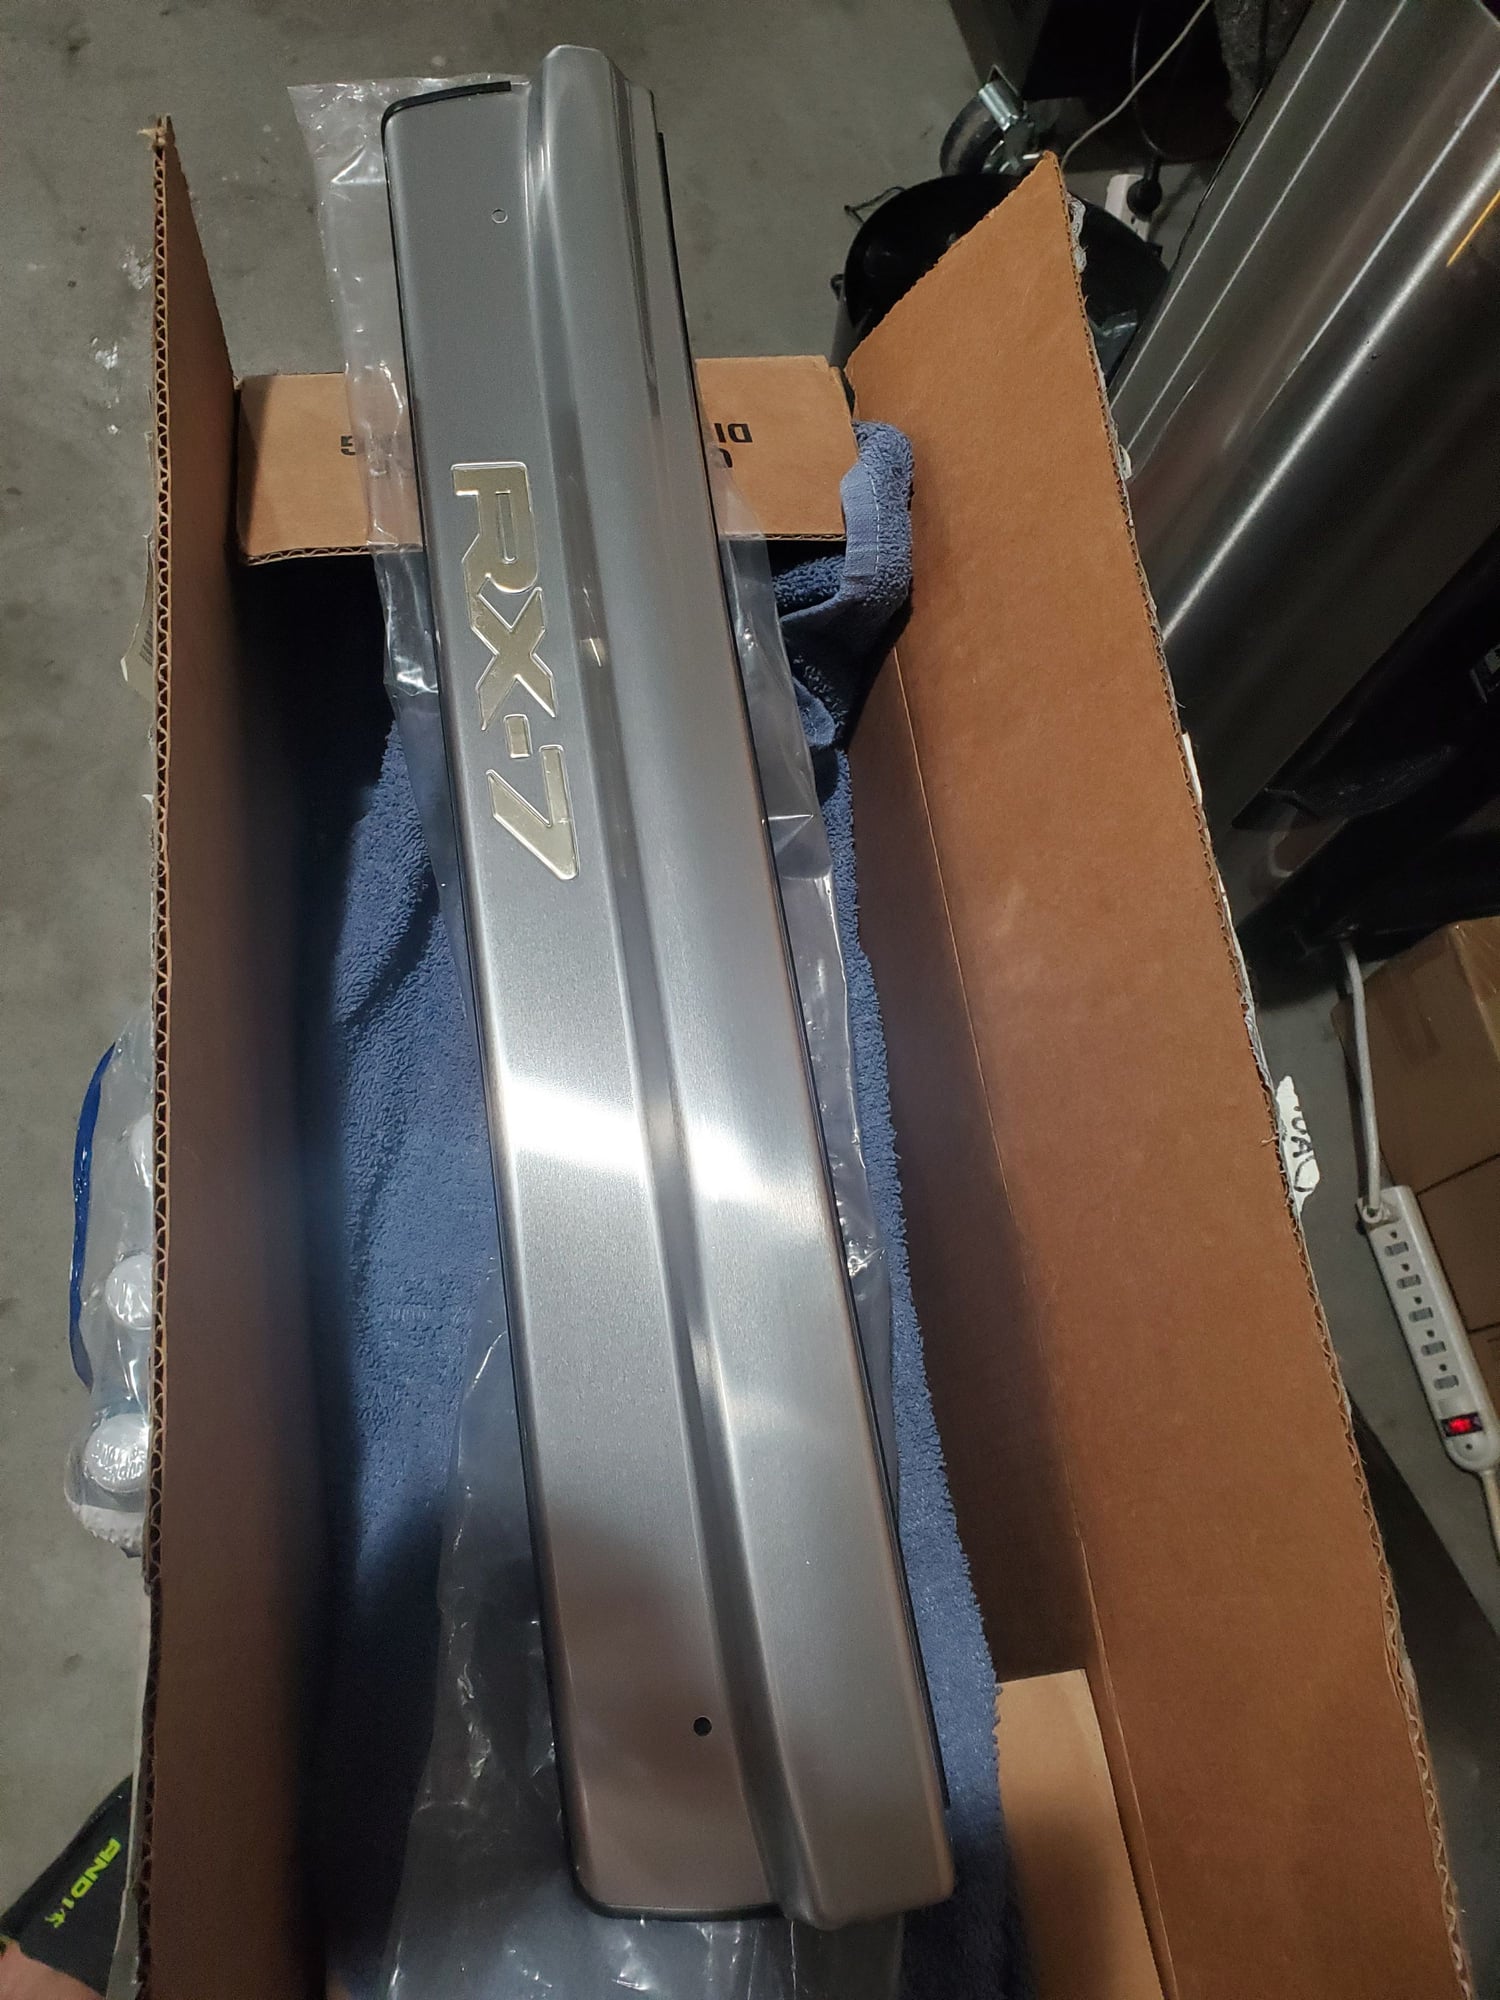 Interior/Upholstery - BNIB oem stainless steel side sills - New - 1993 to 1995 Mazda RX-7 - Desert Hot Springs, CA 92240, United States